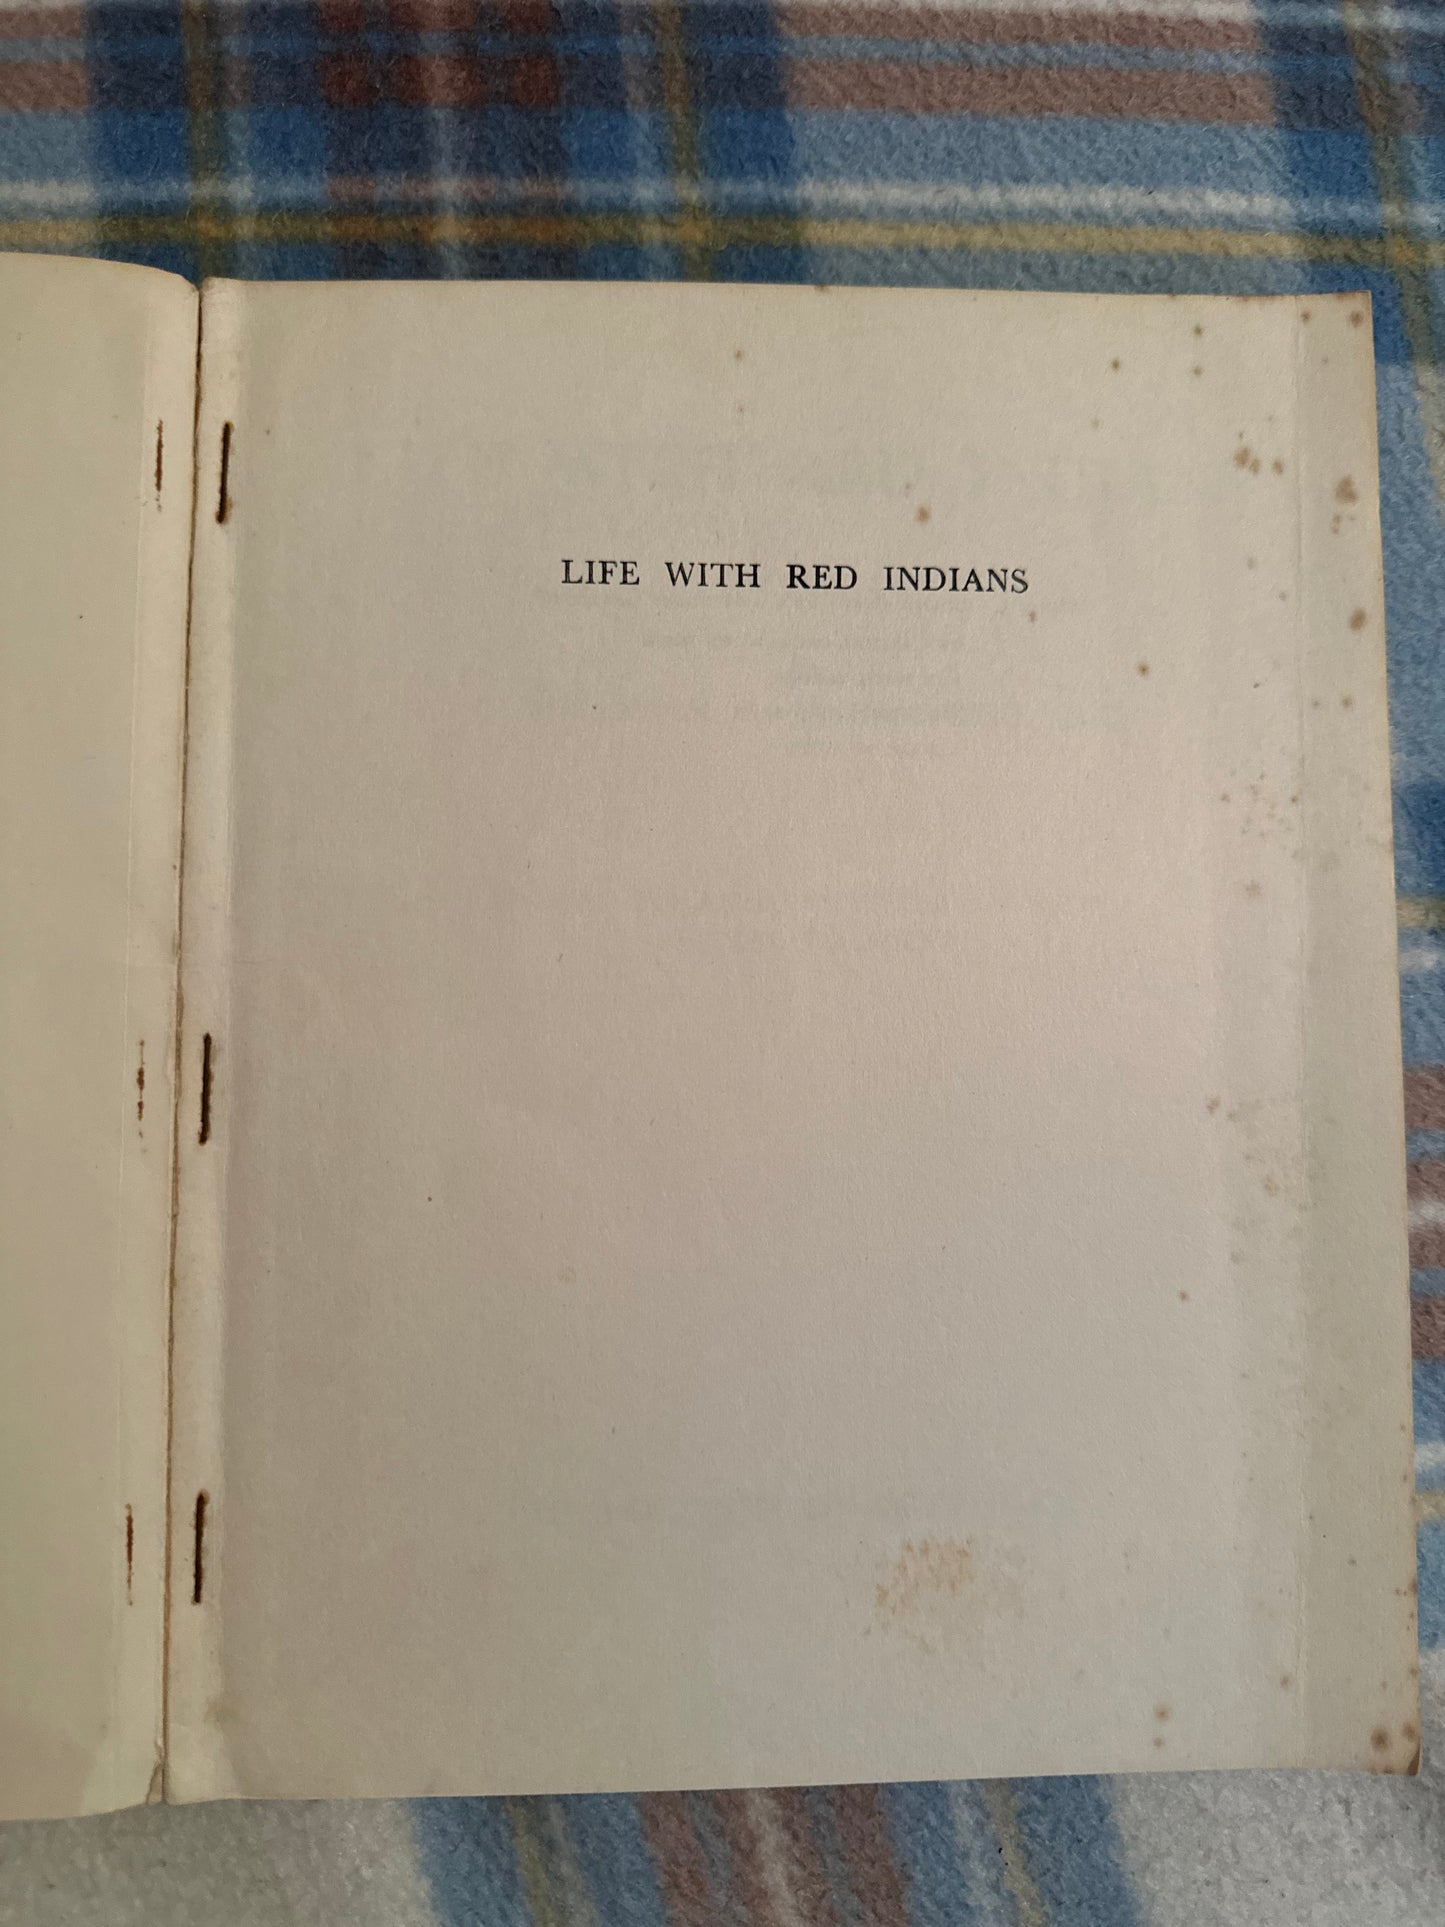 1956*1st* Life With Red Indians - Commander A. B. Campbell(The Epworth Press)